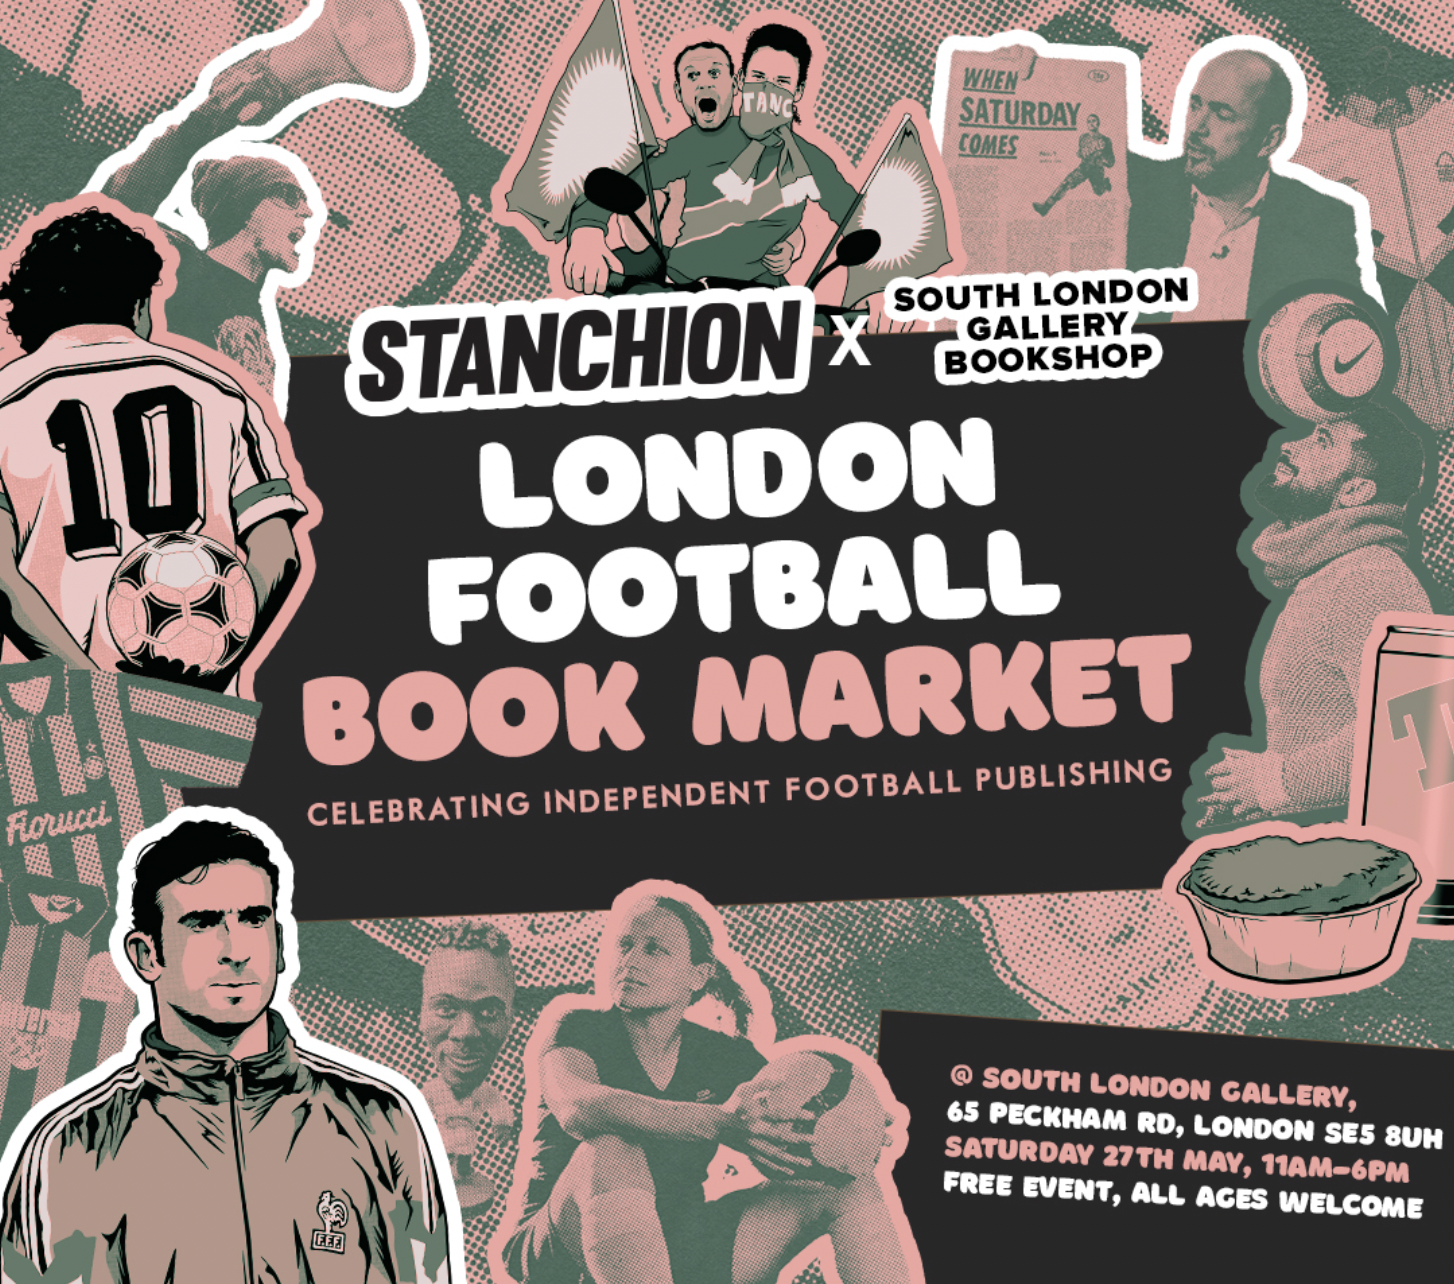 Arsenal Supporters: The Gooner Fanzine Will Be At The London Football Book Market on Saturday - Why Not Come Along